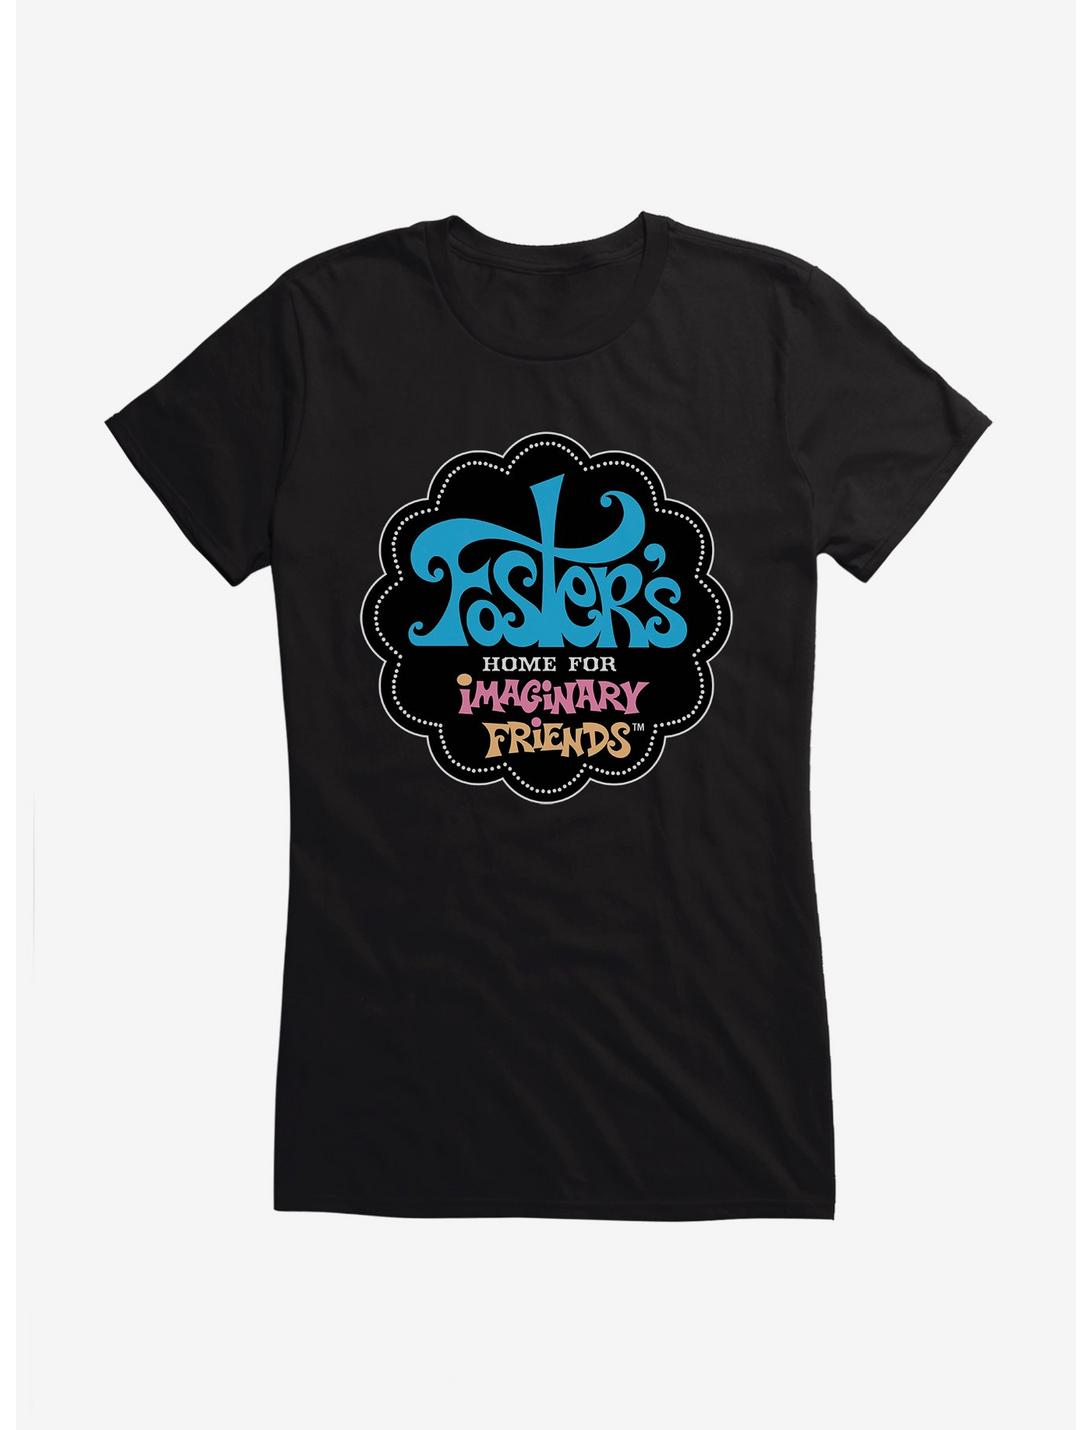 Foster's Home For Imaginary Friends Show Title Girl's T-Shirt, , hi-res